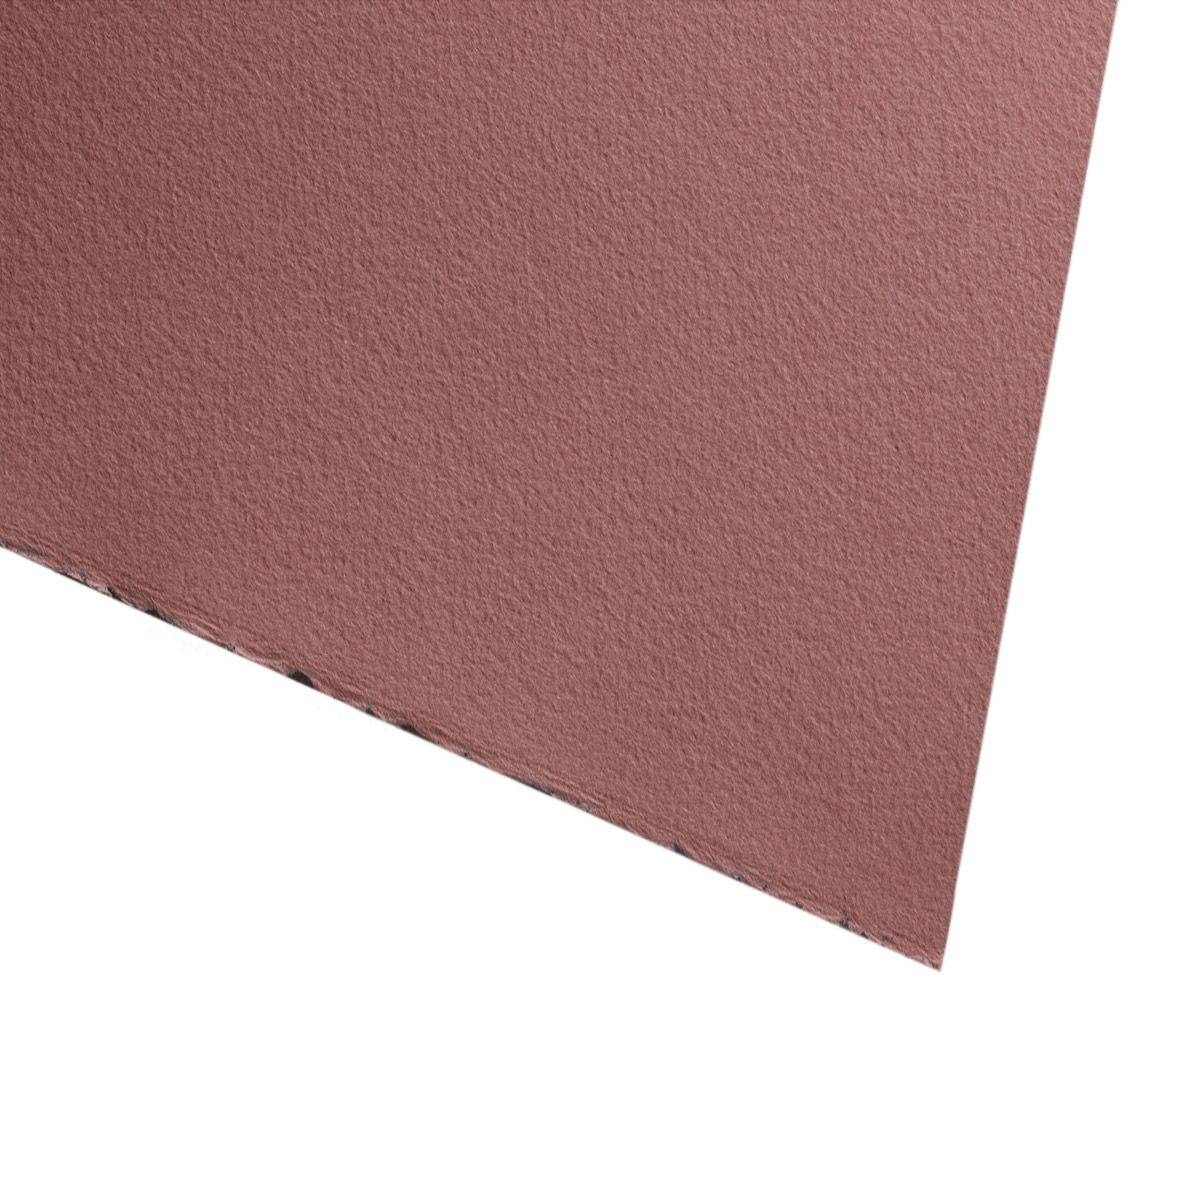 Fabriano Cromia Paper Sheet Pale Brown 19.6